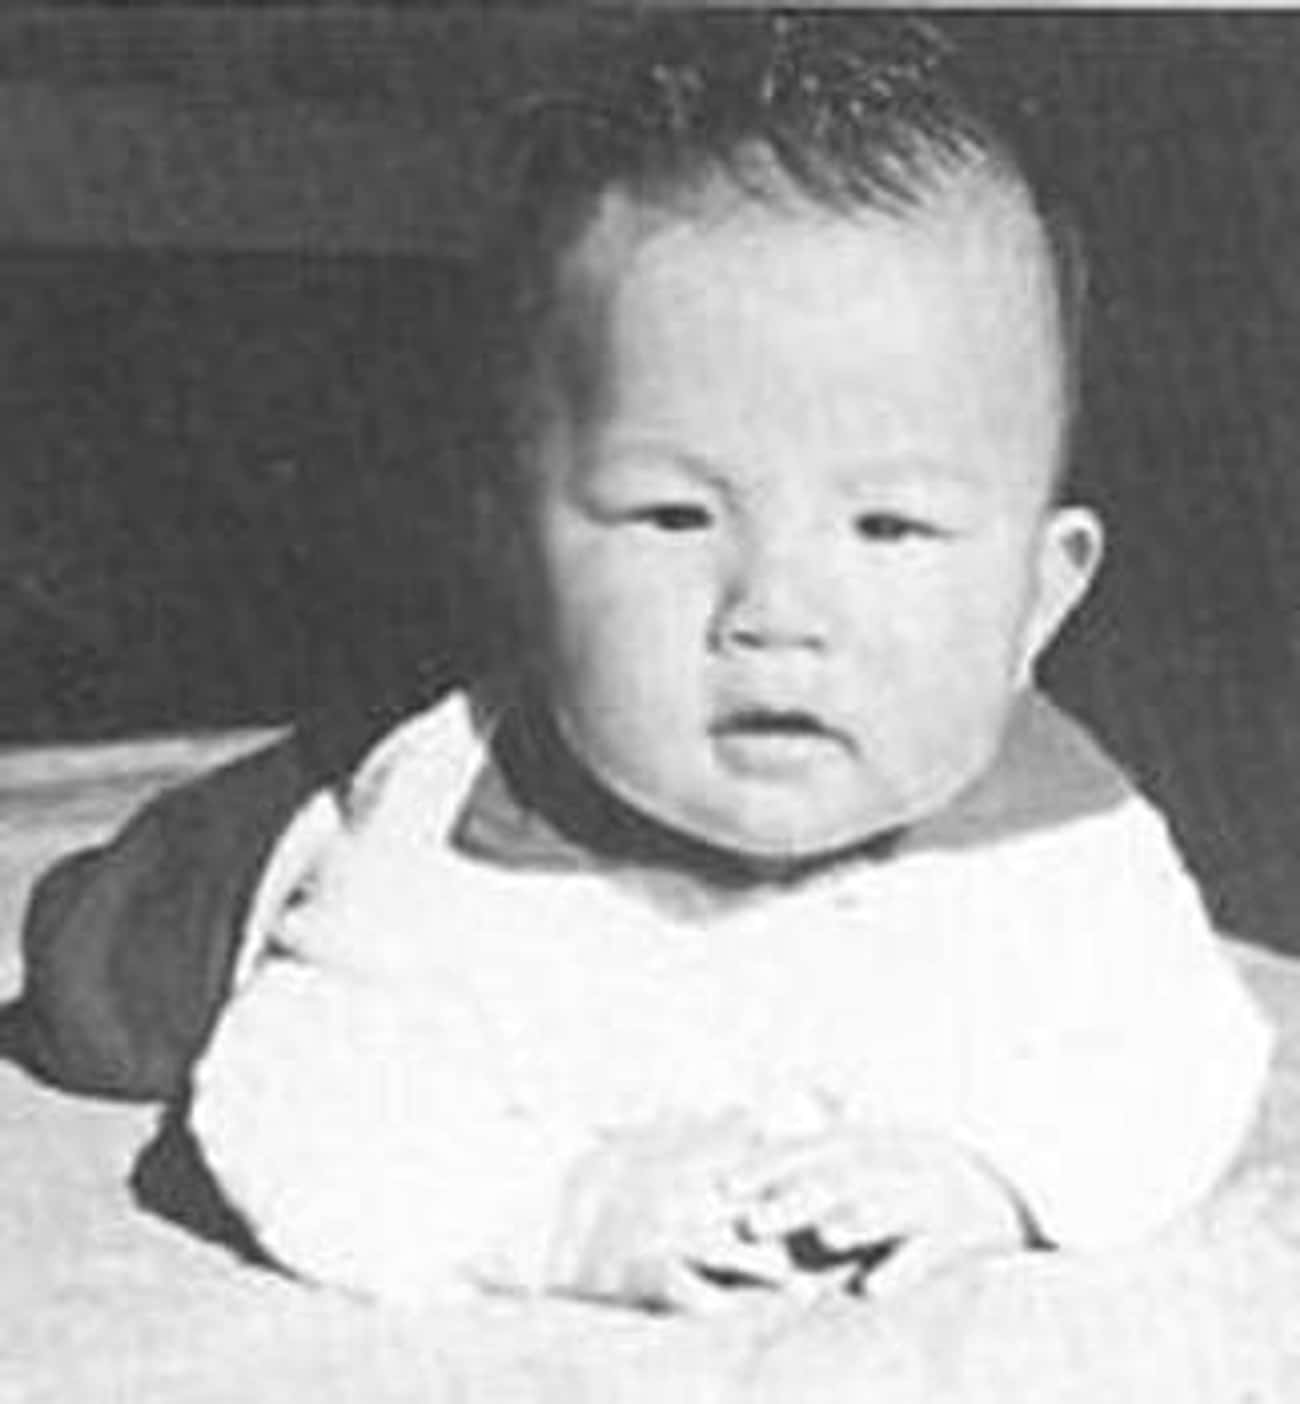 Young Jackie Chan as a Baby